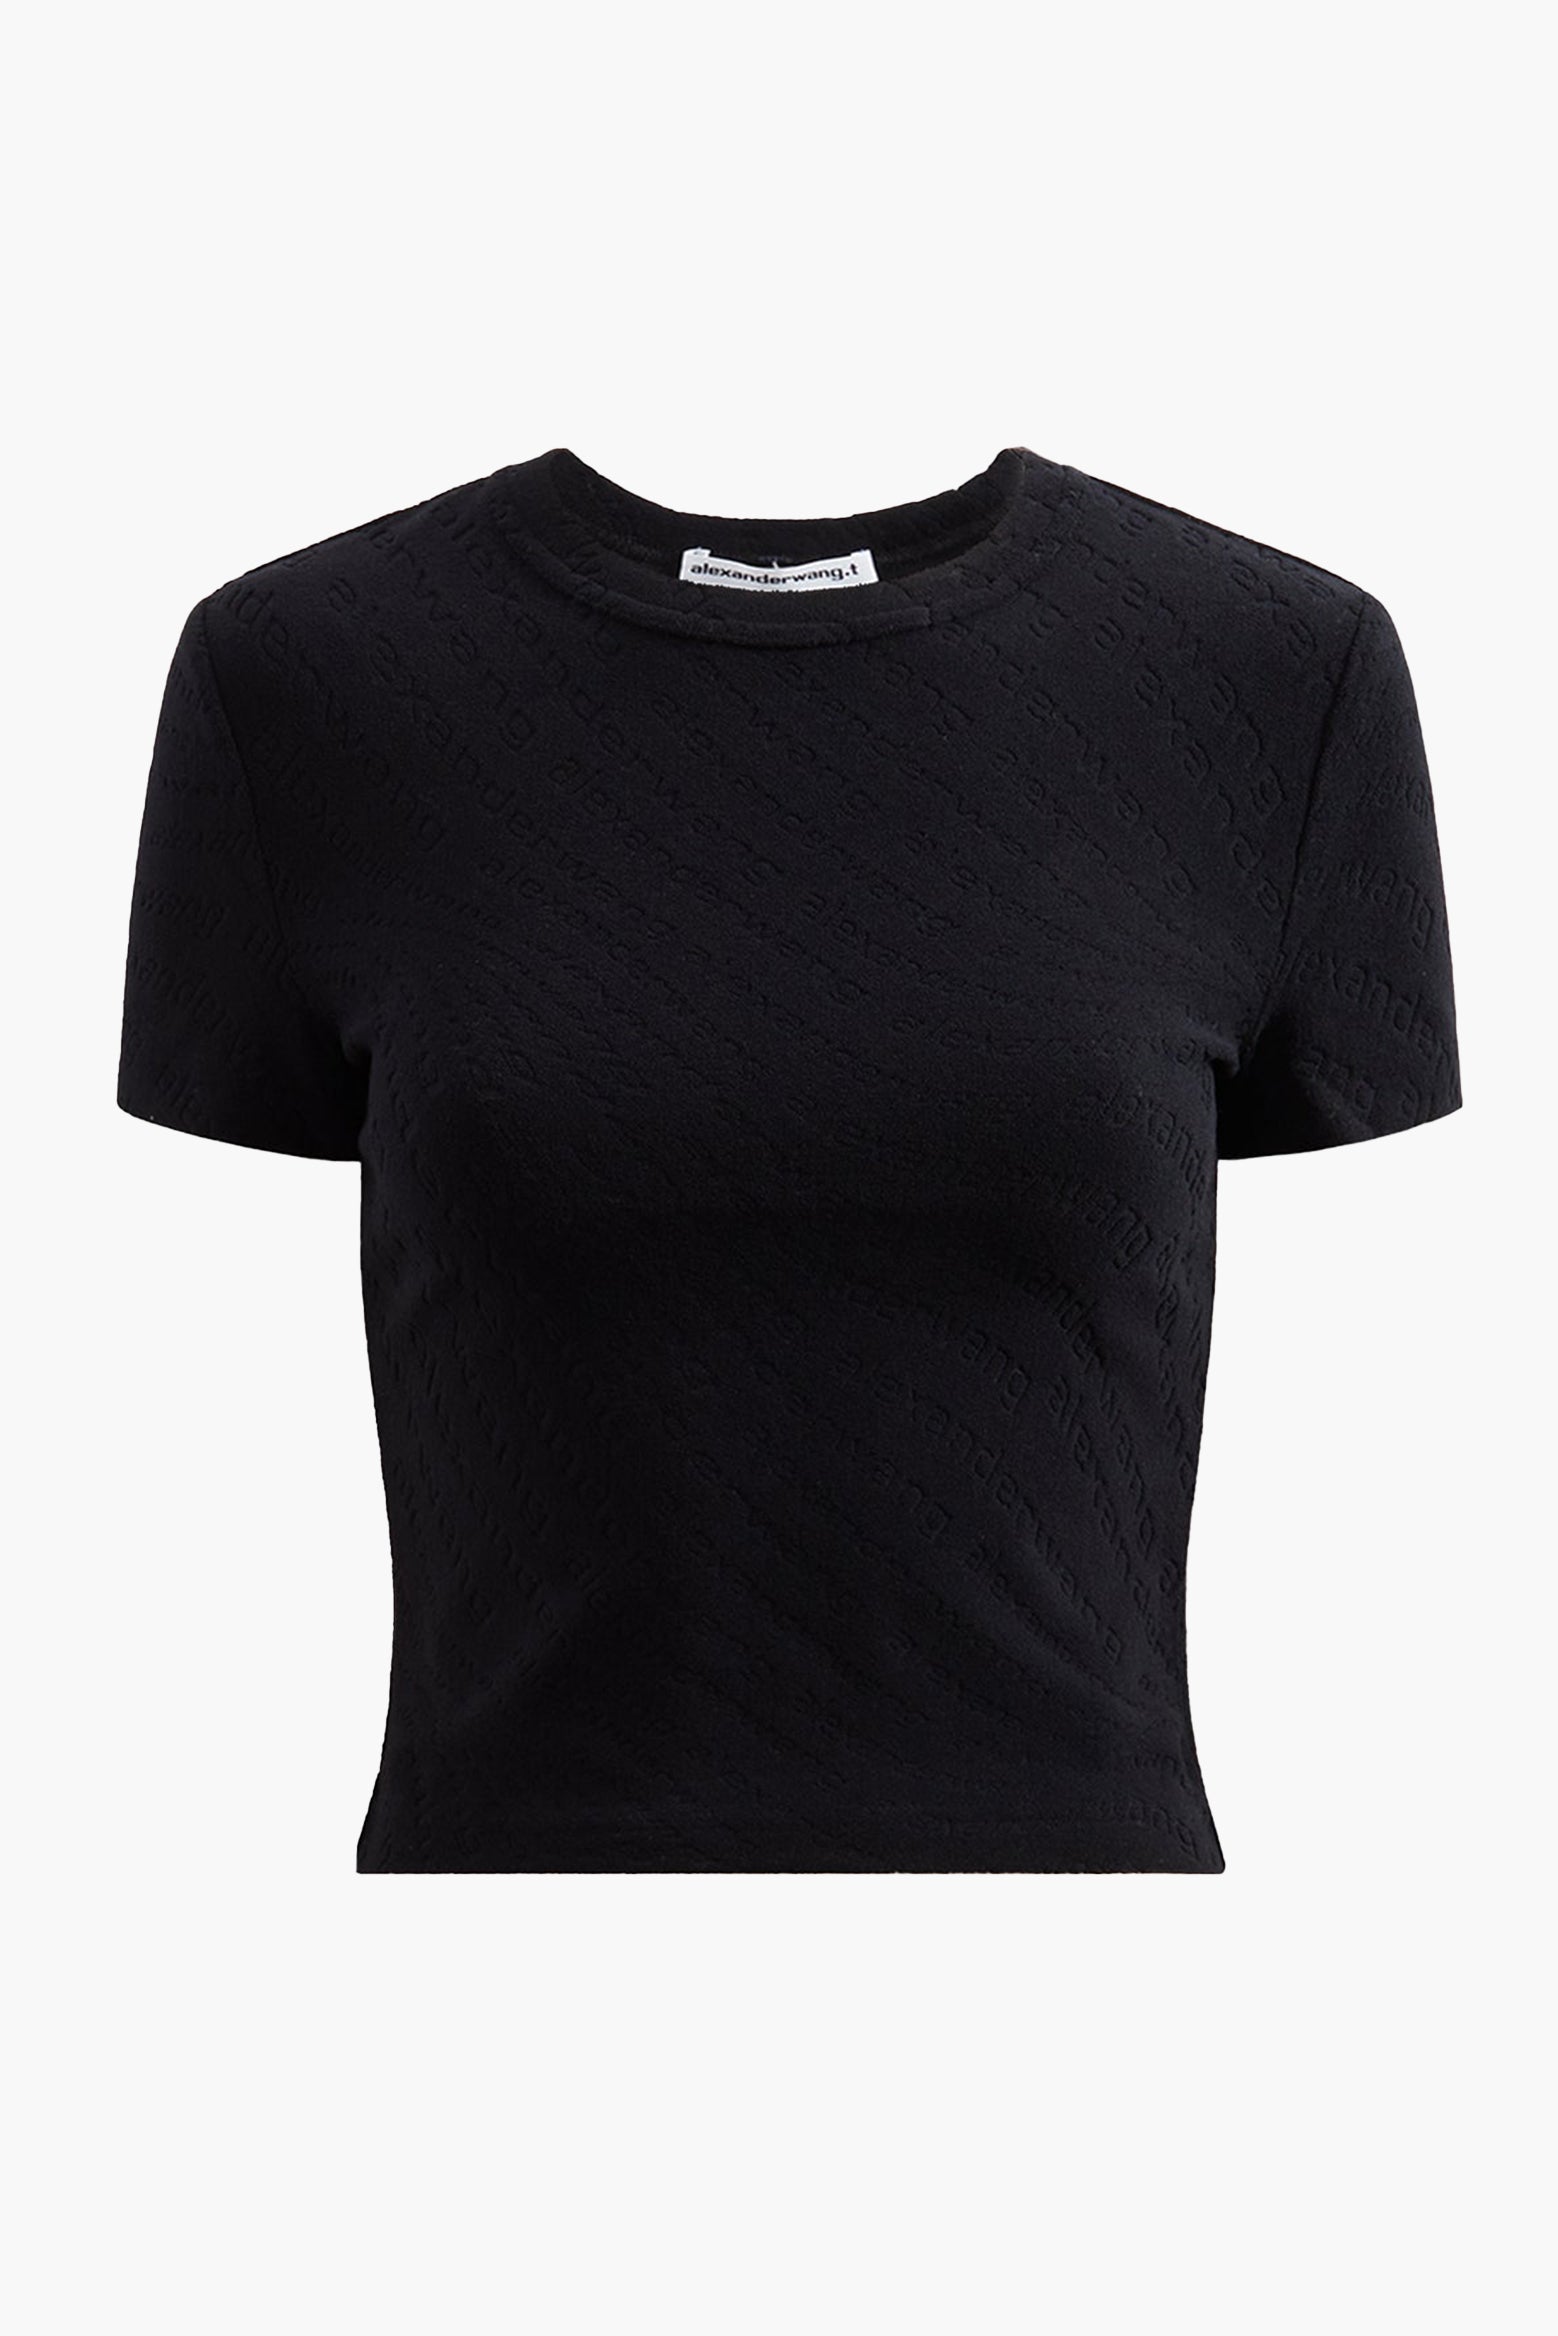 The Alexander Wang t Crew Neck Short Sleeve Baby Tee in Black available at The New Trend Australia